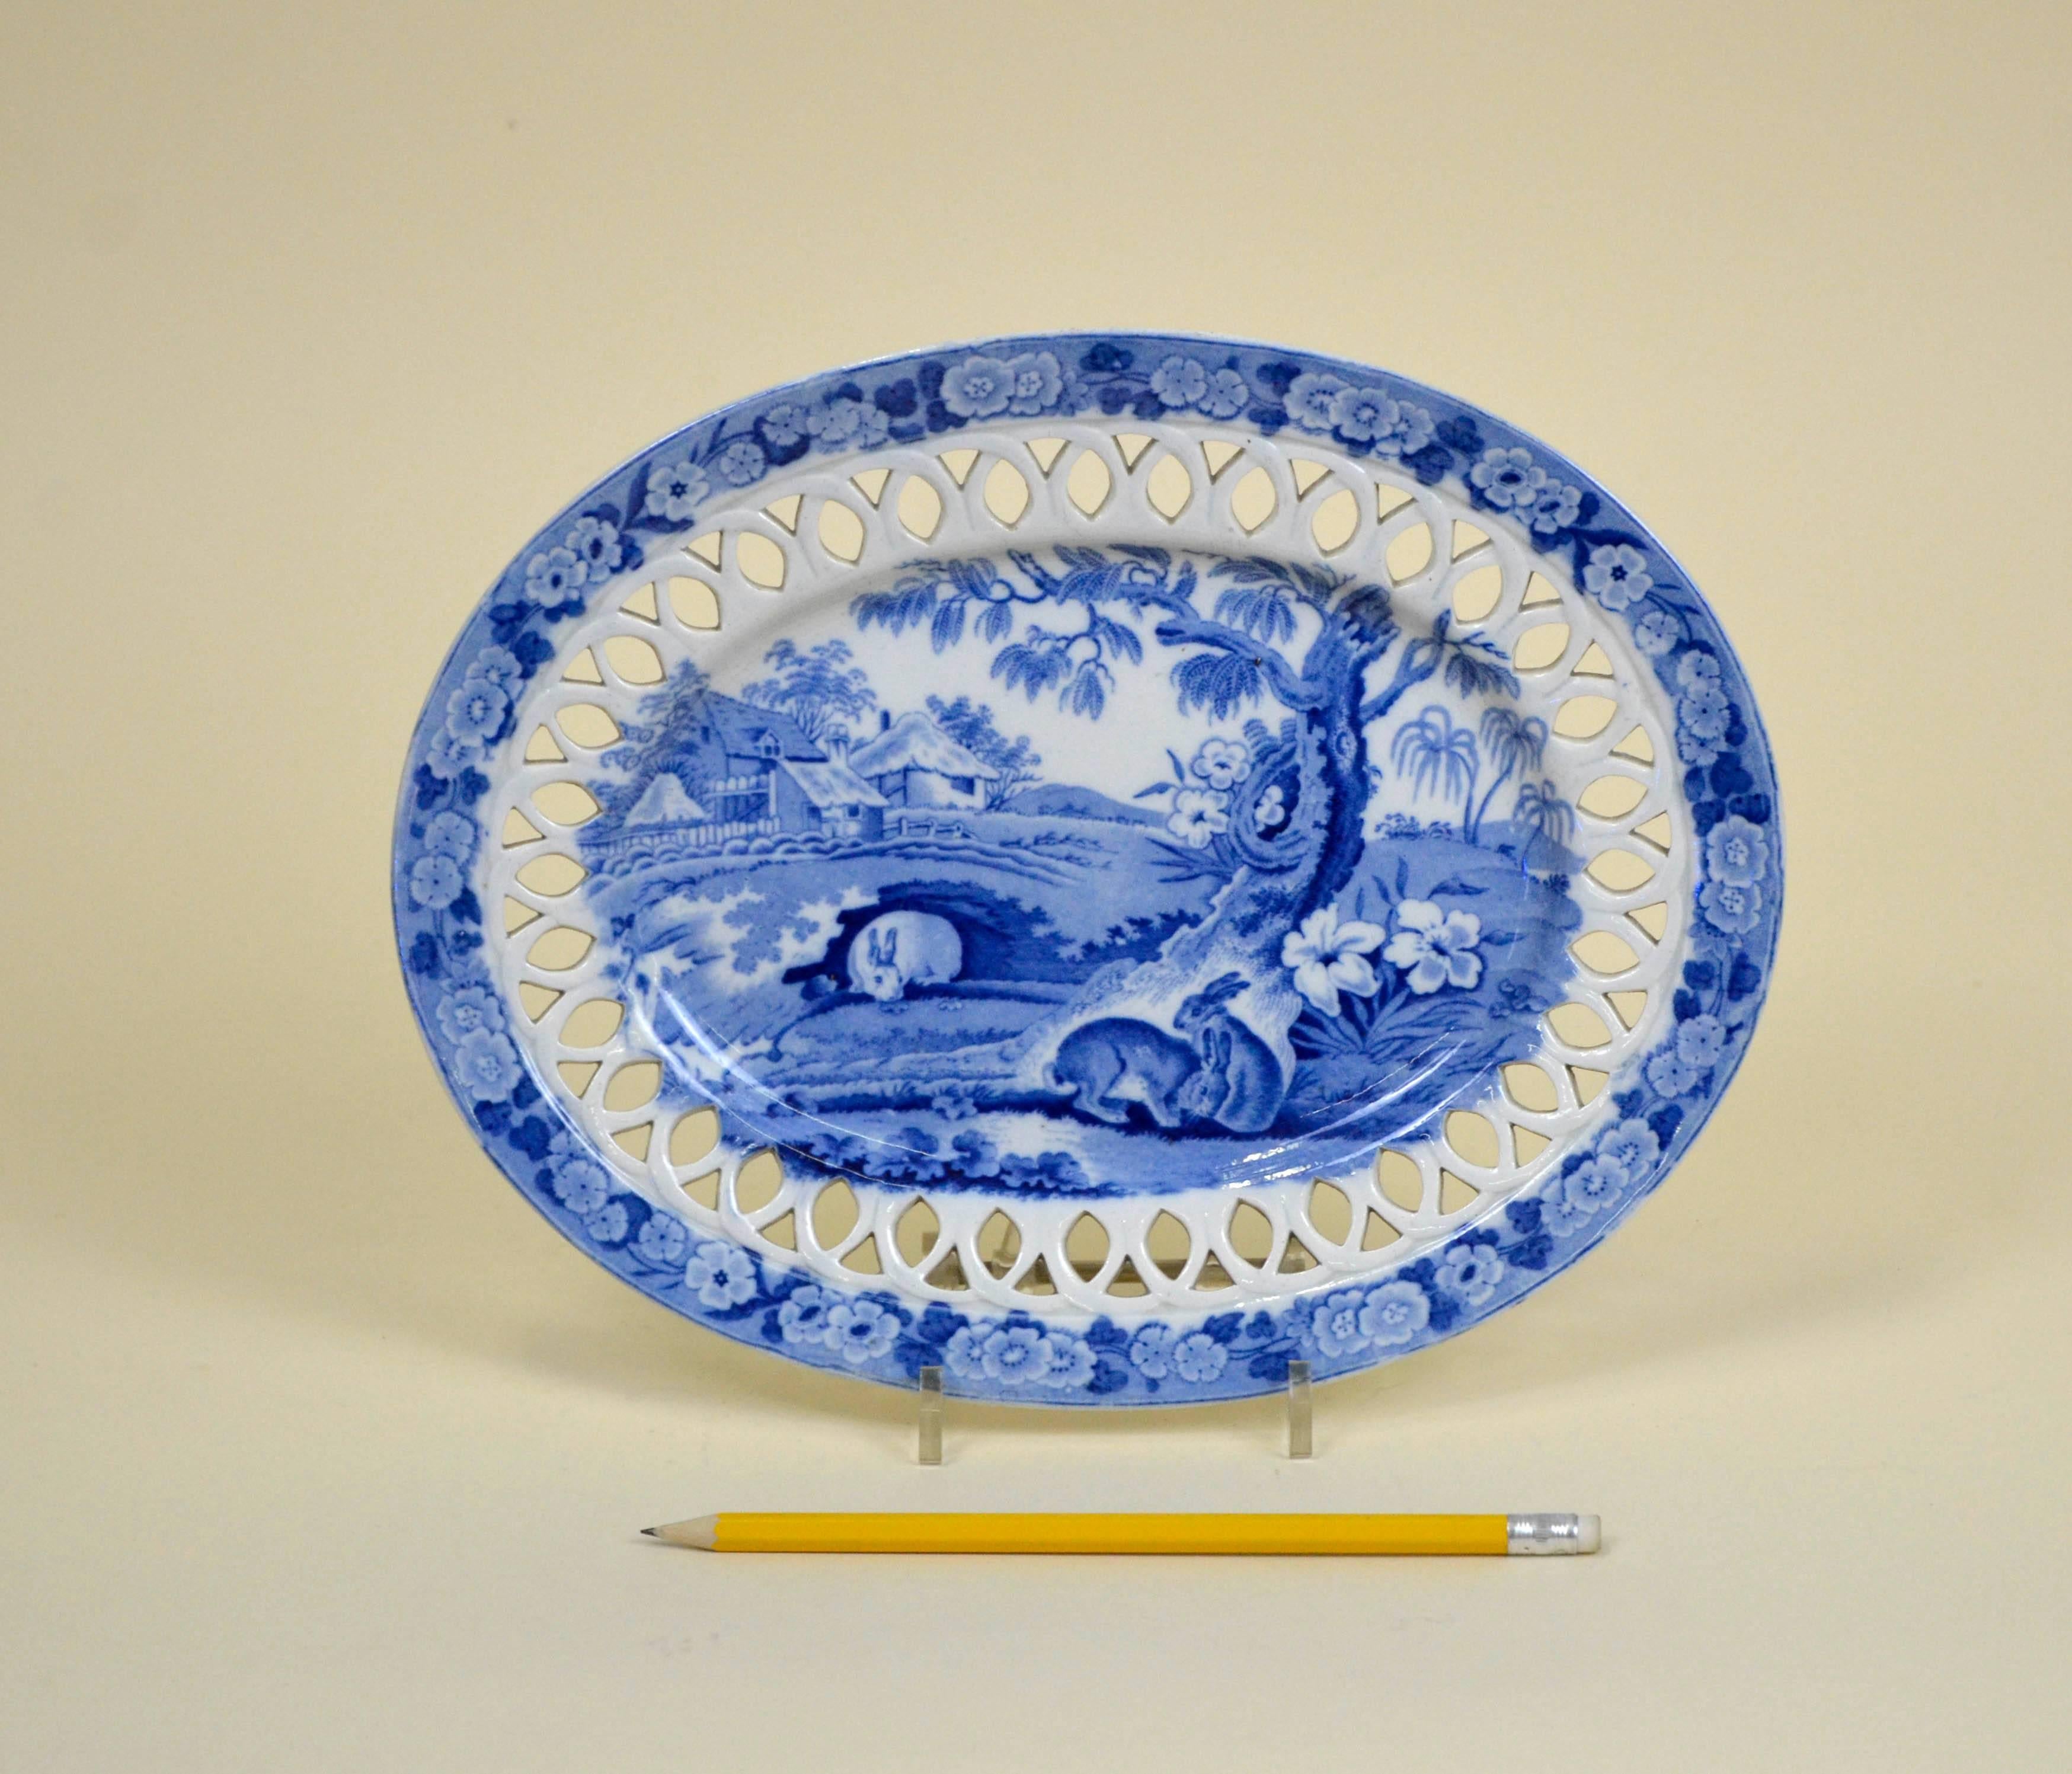 Earthenware oval stand with a basket weaved rim, made in Staffordshire in circa 1830.
Printed in blue and white with grazing rabbits. 

In excellent condition; no chips, cracks, restoration or signs of wear.
 